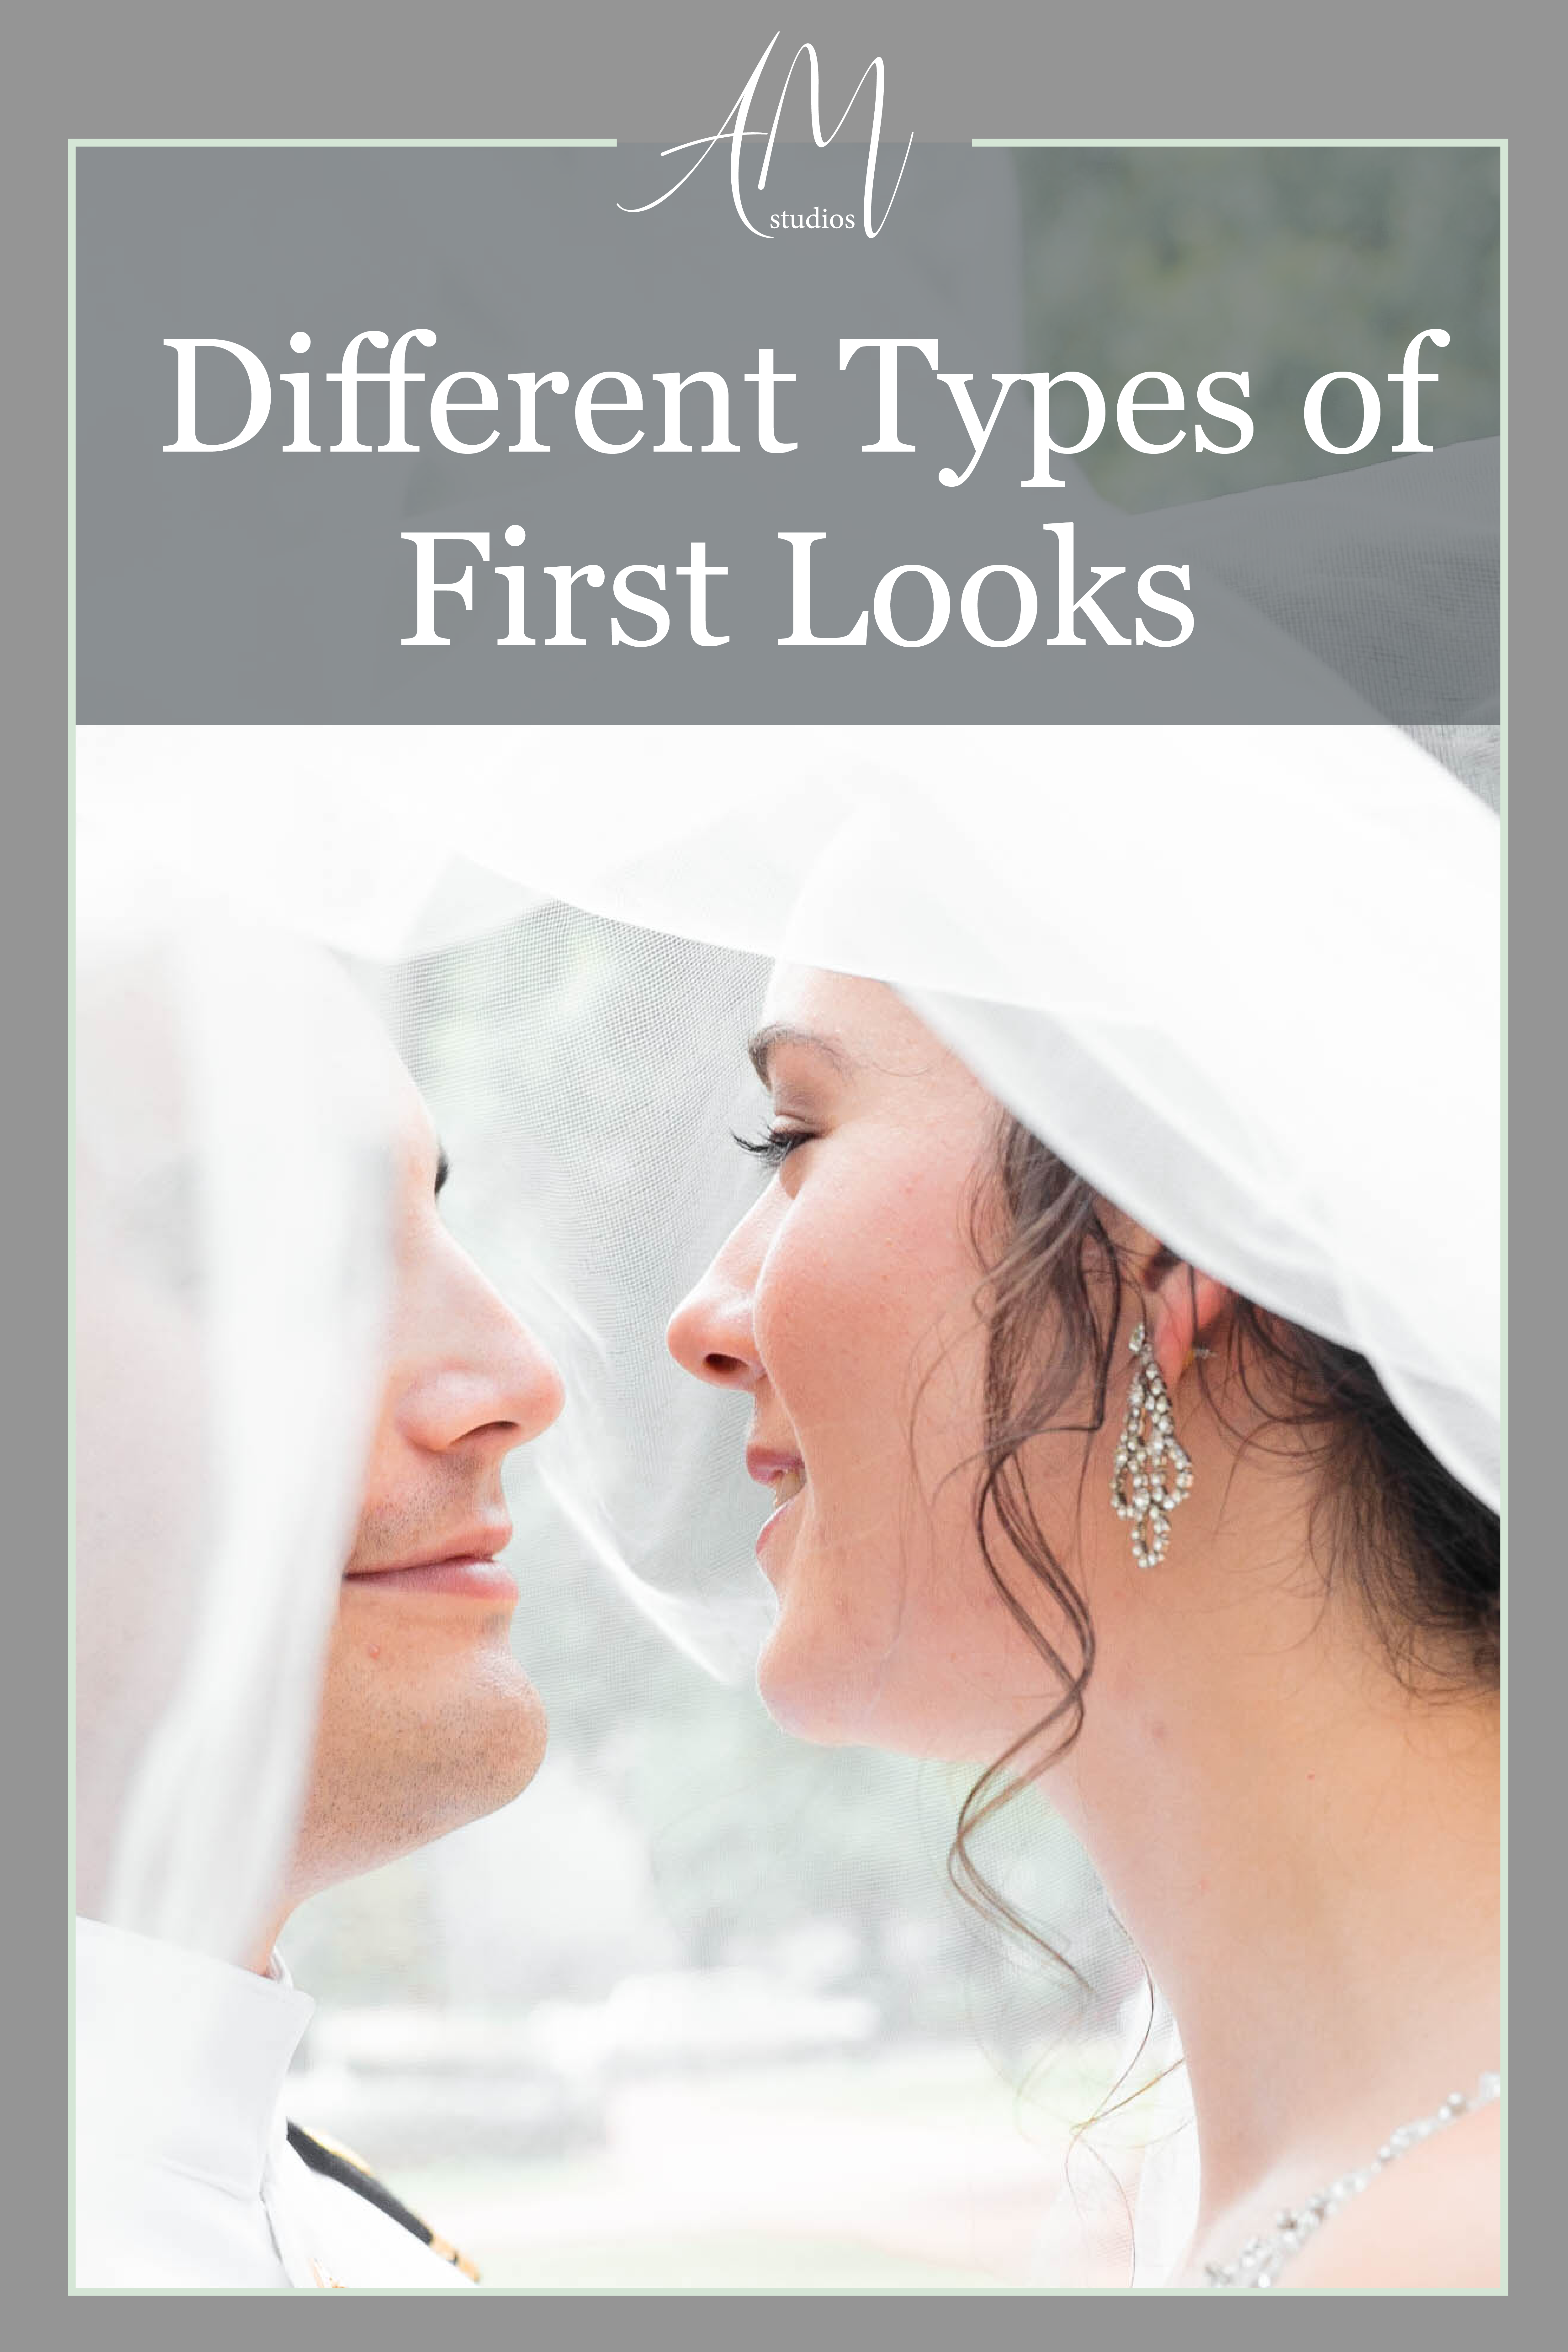 AMS Guide to First Looks for your wedding